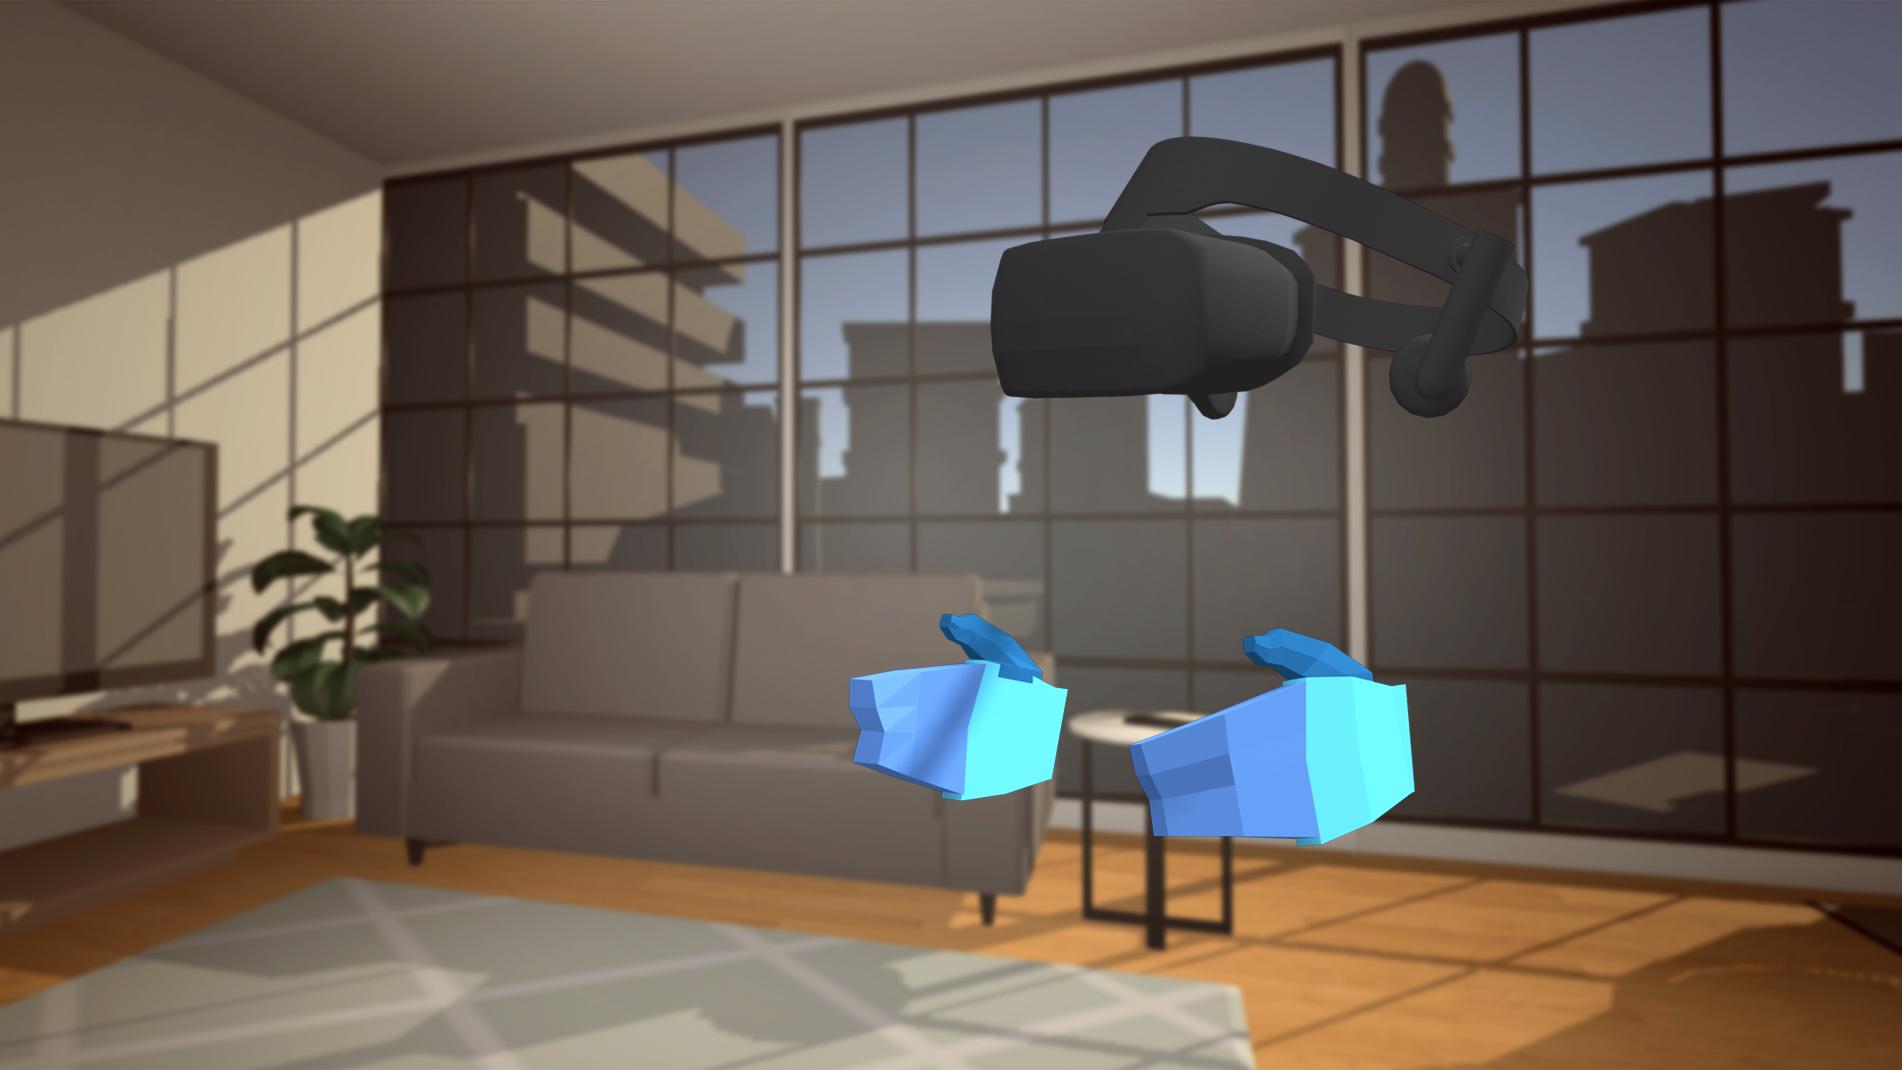 Representative image for the “Create with VR” Unity Learn course